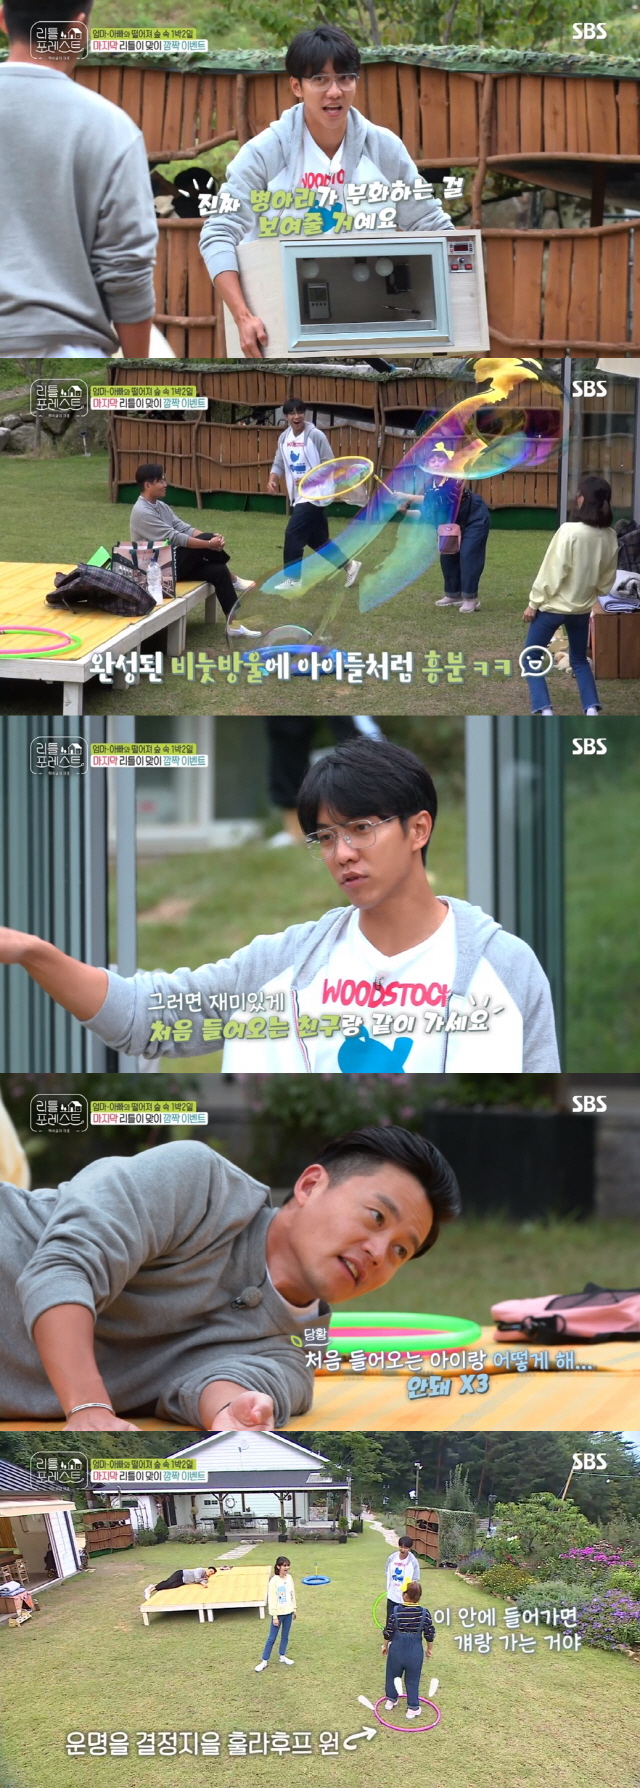 SBS Wolhwa Entertainment Little Forest recorded the highest audience rating of 4.7%.In SBS Little Forest broadcast on the last 30 days, Lee Seung-gi and Lee Seo-jin laughed at the subtle competition.The two men had a statue-dreaming vision of making a swing to present a new experience to Little on this day, and Lee Seung-gi had conceived a dynamic single-string swing.But Lee Seo-jin was anxious, saying, Is not the outer swing a bit dangerous?After the single-line swing was completed, Lee was satisfied with the swing rising high, but Brooke and Grace were only interested for a while and asked to drop it down saying I will stop.Lee Seung-gi said, No, if you make it like this, you do not have 10 minutes.Lee Seo-jin began to make two safe line swings: after a much more complex production process than the single line swing, the swing was completed, but the reality was the nojam swing.Lee Seo-jin predicted, This seems to have provided only Jung Heon and Yunas dating places here, and this expectation hit.Littles then challenged the puppy care; Littles, who had been on a mission to care for their newborn babies in their neighborhood, went to see the puppy in anticipation.After bringing Puppy home, and with Jung So-min Park Na-rae, he was immersed in caring for Puppy, making a house for Puppy and feeding milk.Lee Han-yi showed an adult appearance to remove the puppys feces and was appointed as a deputy to Lee Seung-gi.Jung So-min, who saw this, said, The children are too small and fragile, and I feel warm because I think that I have to protect the weaker puppy than them.I expressed my feelings.The competition between Lee Seo-jin and Lee Seung-gi, which ended in a draw in swing making, led to aunts and Lee Han-is Choices.While making lunch for Little, Park Na-rae told Jung So-min, Do you think it would be nice if Lee Seung-gi or Lee Seo-jin were Father?I asked, and both replied, Seojin Father! at the same time.Jung So-min said, I like grazing, he said. I want to live with the winner Father until the age of 13, and then Seojin Father.Lee Han-yi also picked Mr Lee The Uncle, which always made delicious food, when asked Who seems to have suffered the most among the Uncle aunts?Lee Seo-jin said, I will give you a full time. Lee Seung-gi, who did not receive Choices, laughed at Lee Han-yi.On the other hand, at the end of the broadcast, the members preparing for the last care were drawn.Lee Seung-gi brought an egg hatchet, and Park Na-rae prepared to play a large soap bubble and be fascinated by Little.Lee Seo-jin was in a situation where he had to go to see the first little girl and the mart. Lee Seo-jin said, I am awkward when I have two nieces!, and this scene was the best one minute with a 4.7% audience rating.SBS Little Forest is broadcast every Monday and Tuesday at 10 pm.